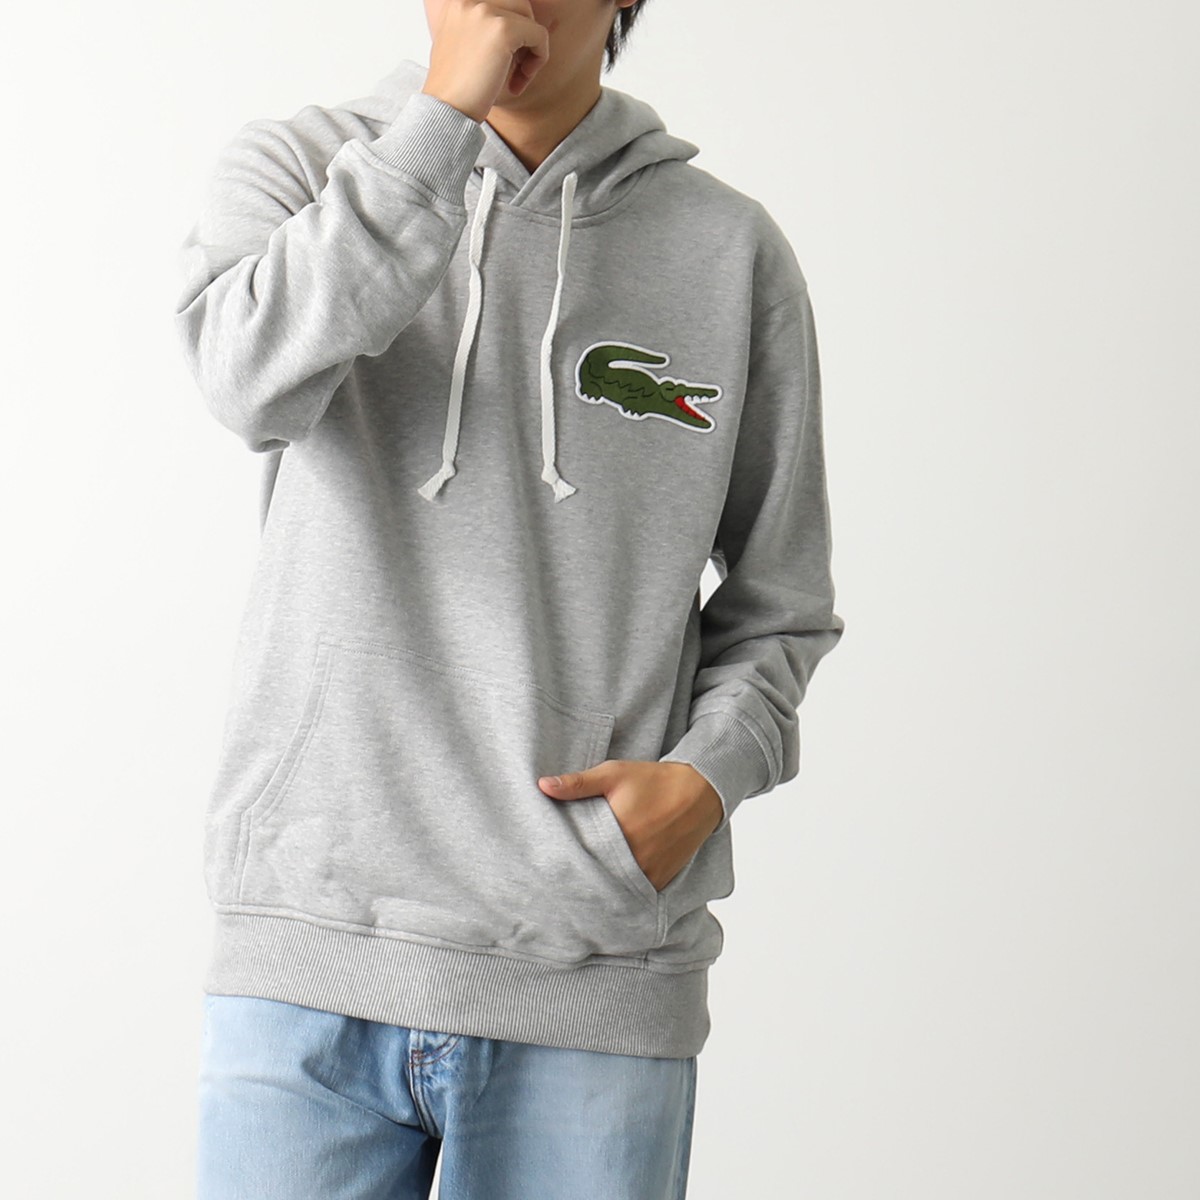 COMME des GARCONS × LACOSTE コムデギャルソン ラコステ コラボ